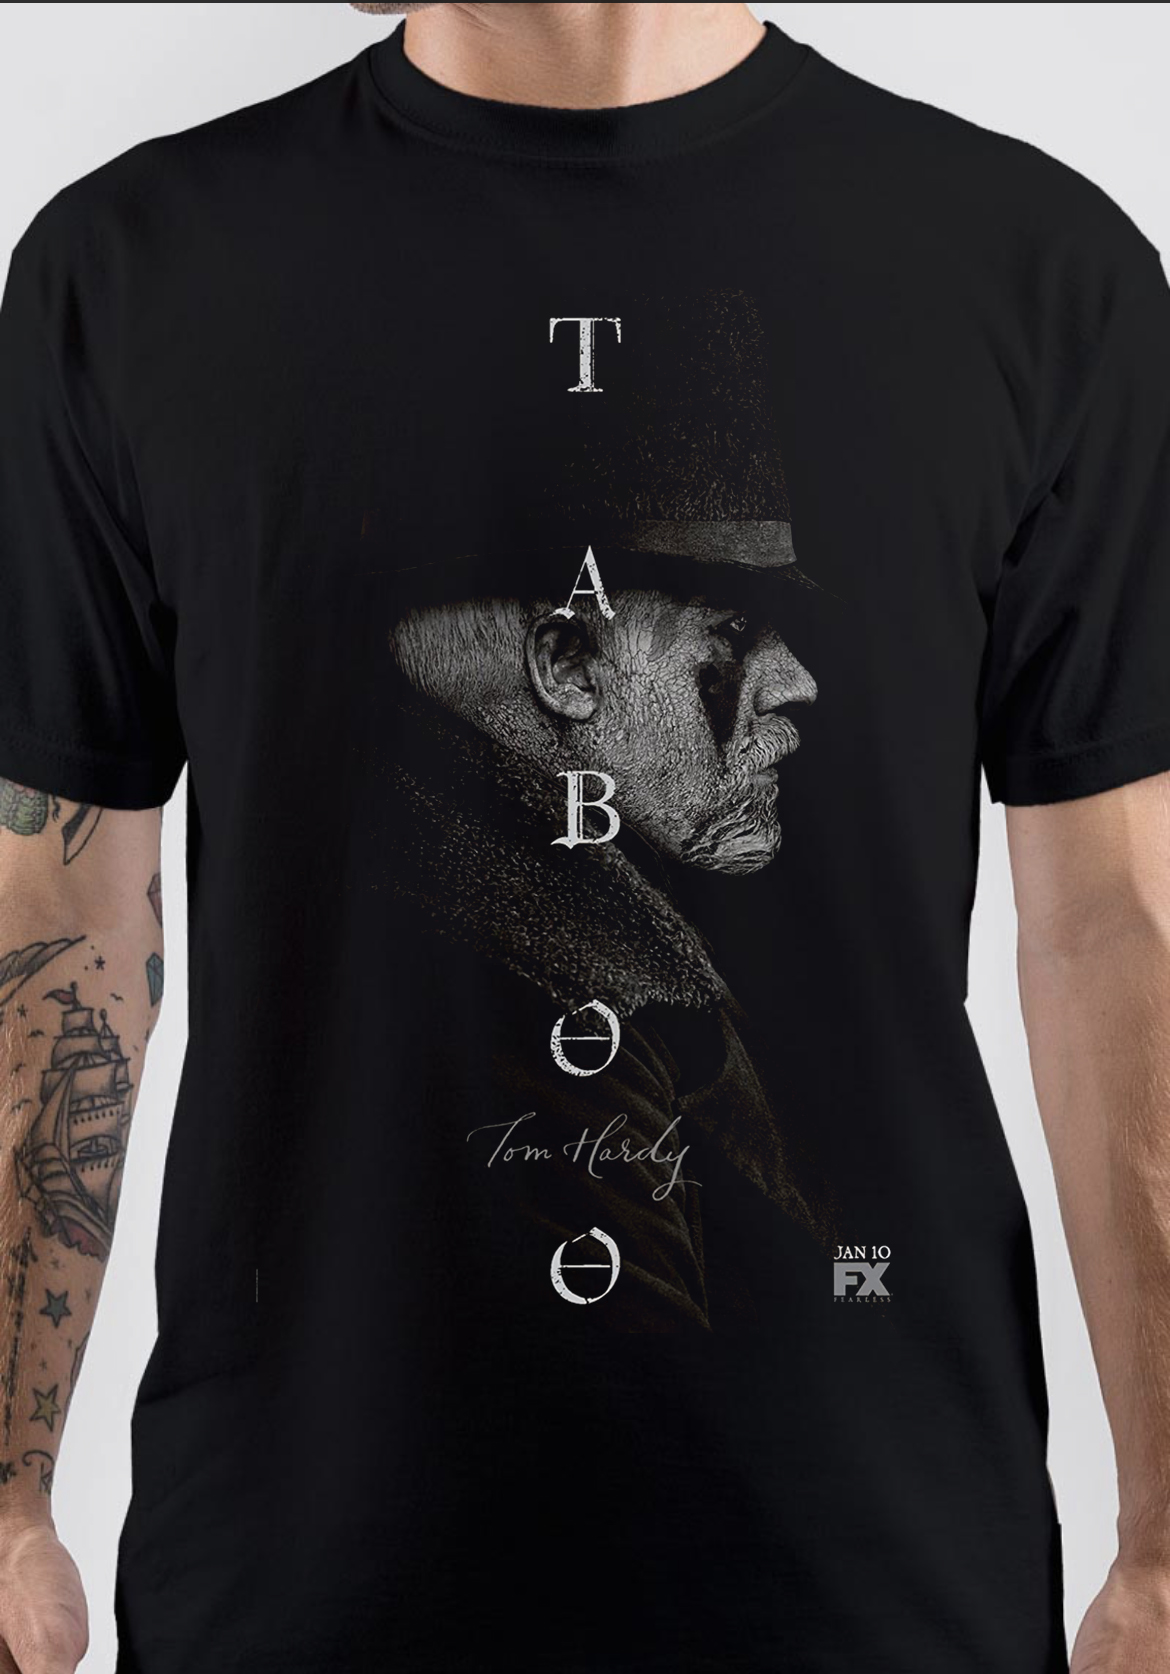 Taboo T-Shirt And Merchandise